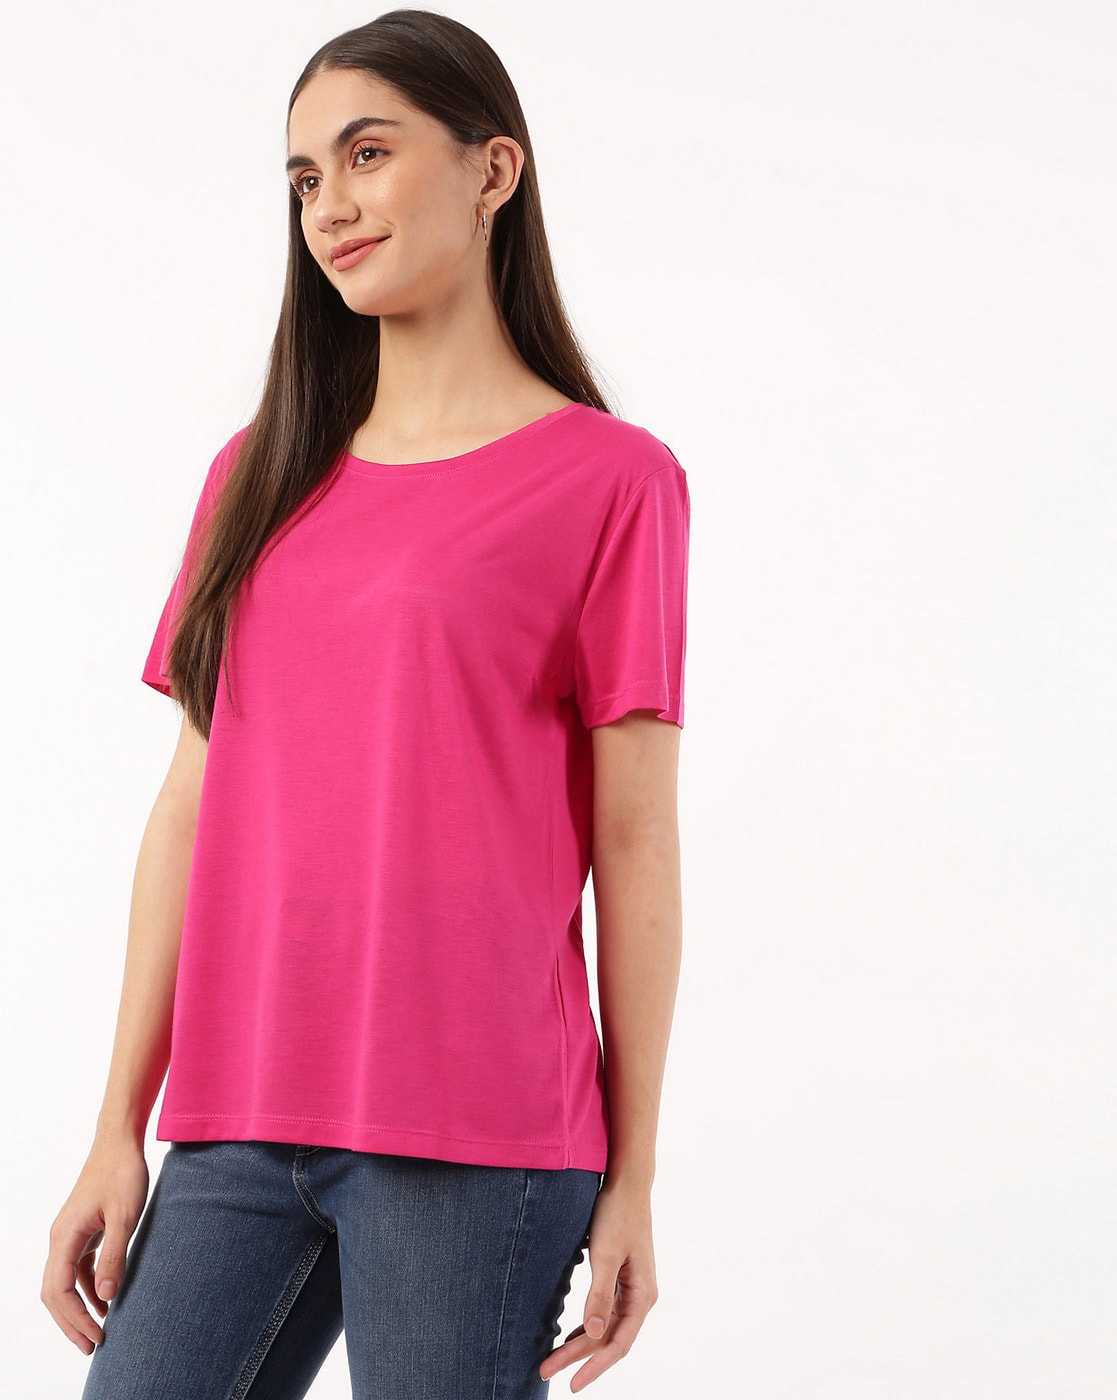 Moda Rapido By Myntra Casual T-Shirts For Women Pink, 42% OFF